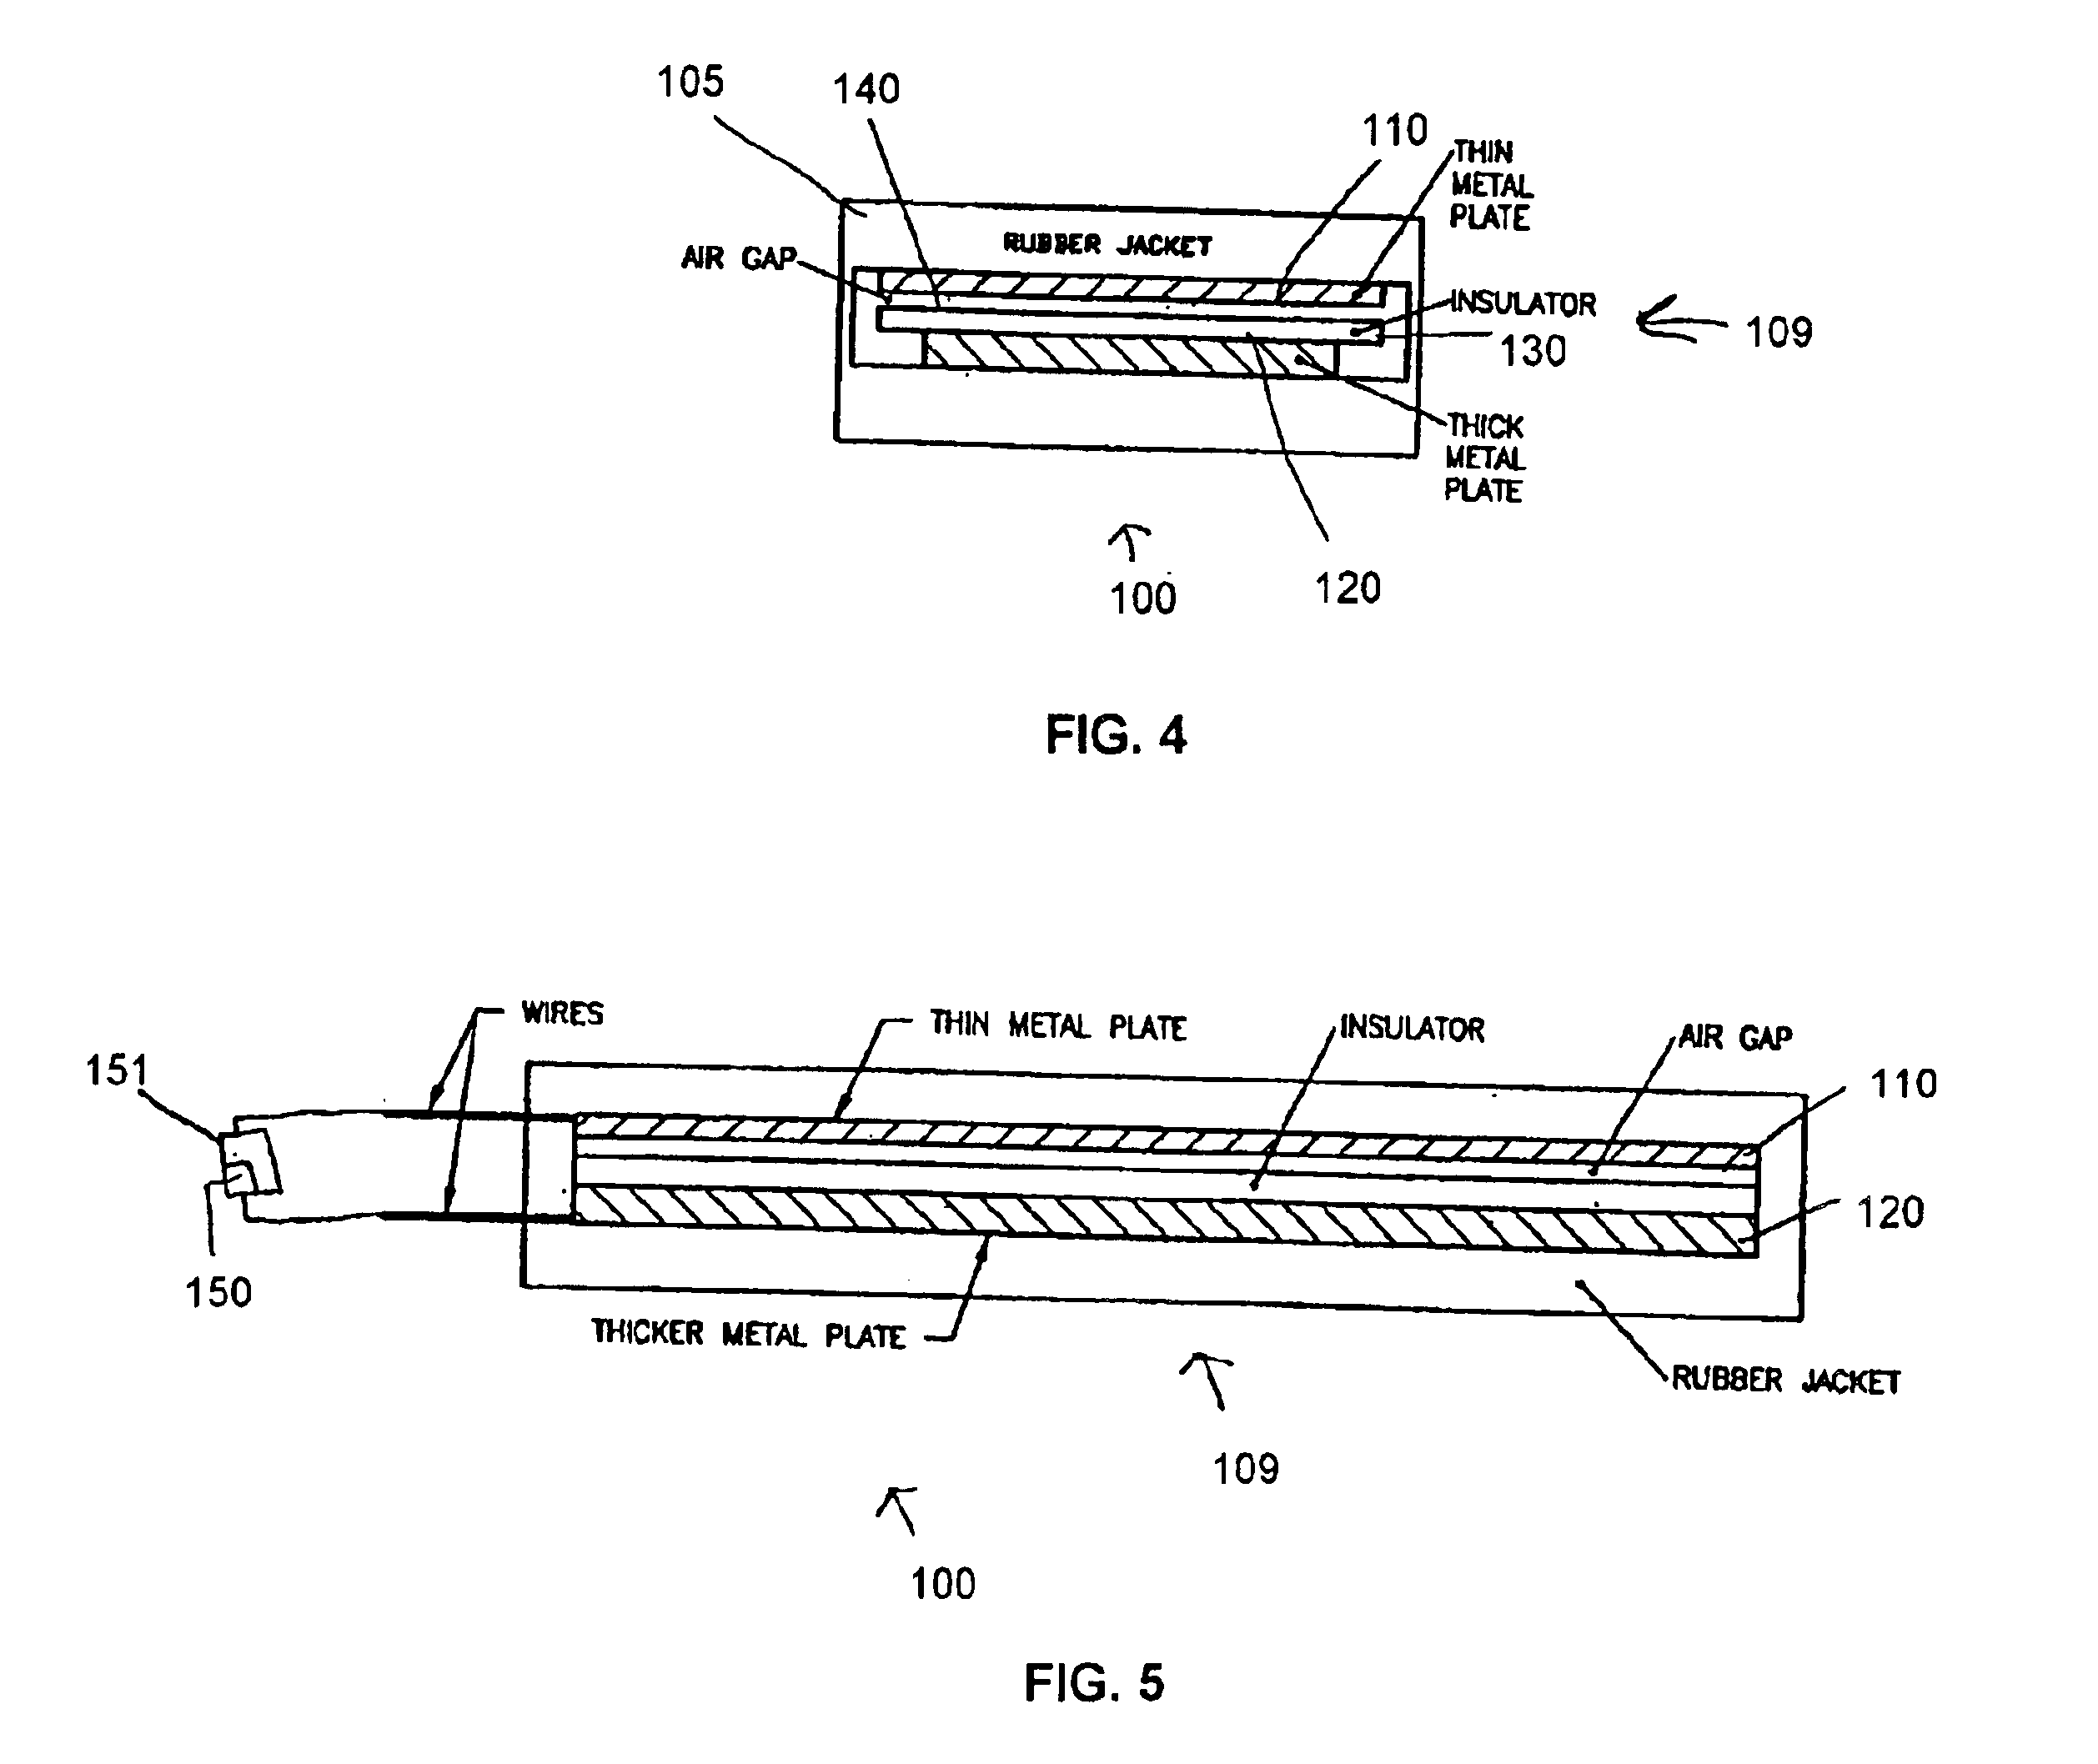 Systems and methods for classifying vehicles